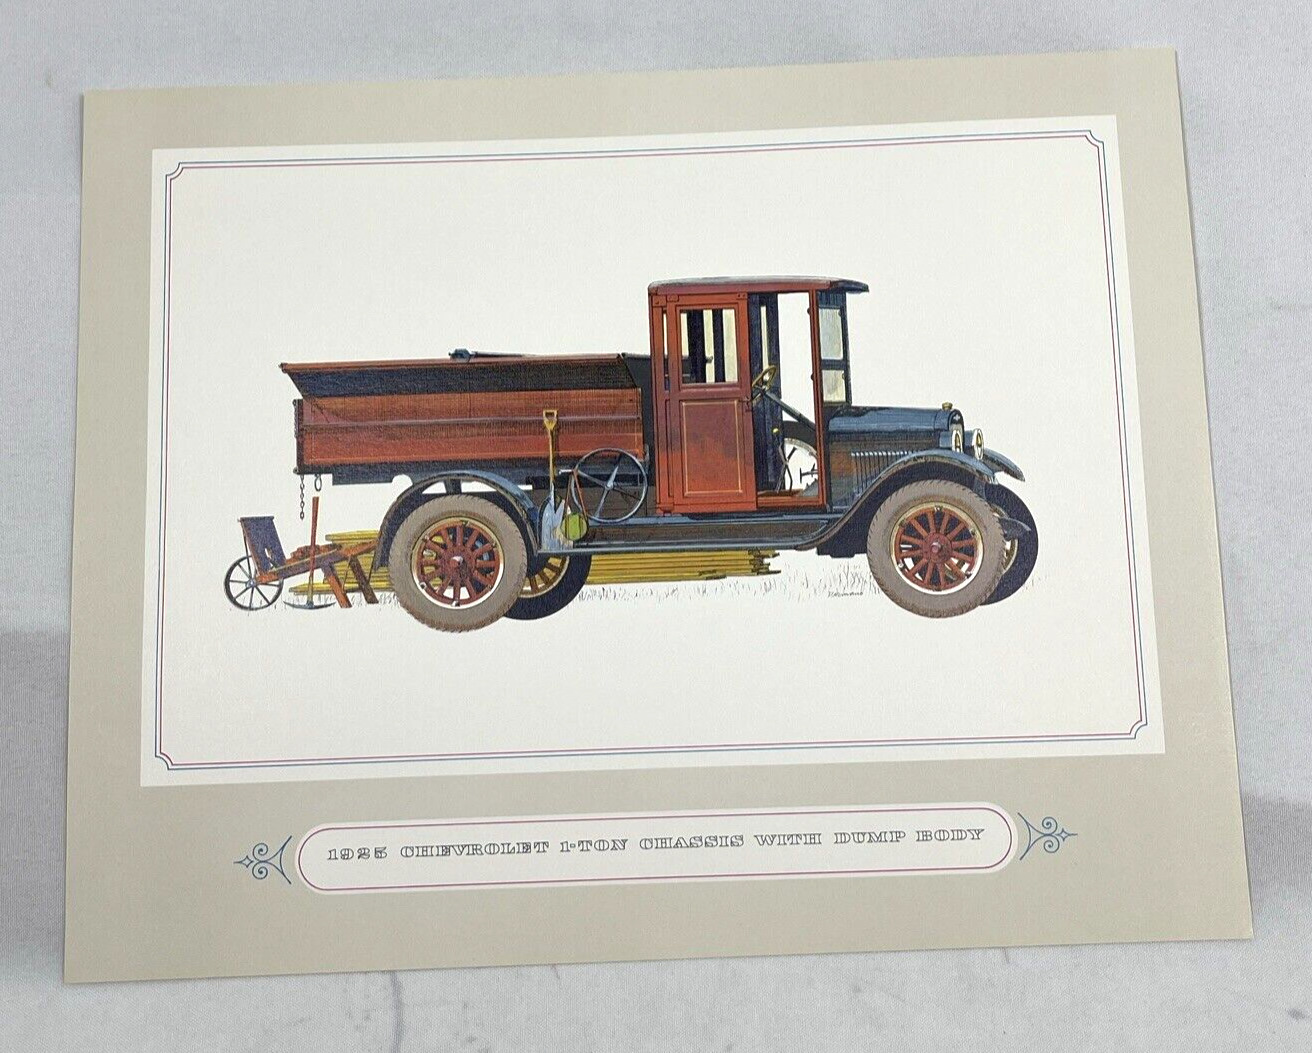 1925 Chevrolet 1 Ton Chassis Truck with Dump Body 1960s 11x14 Color Print